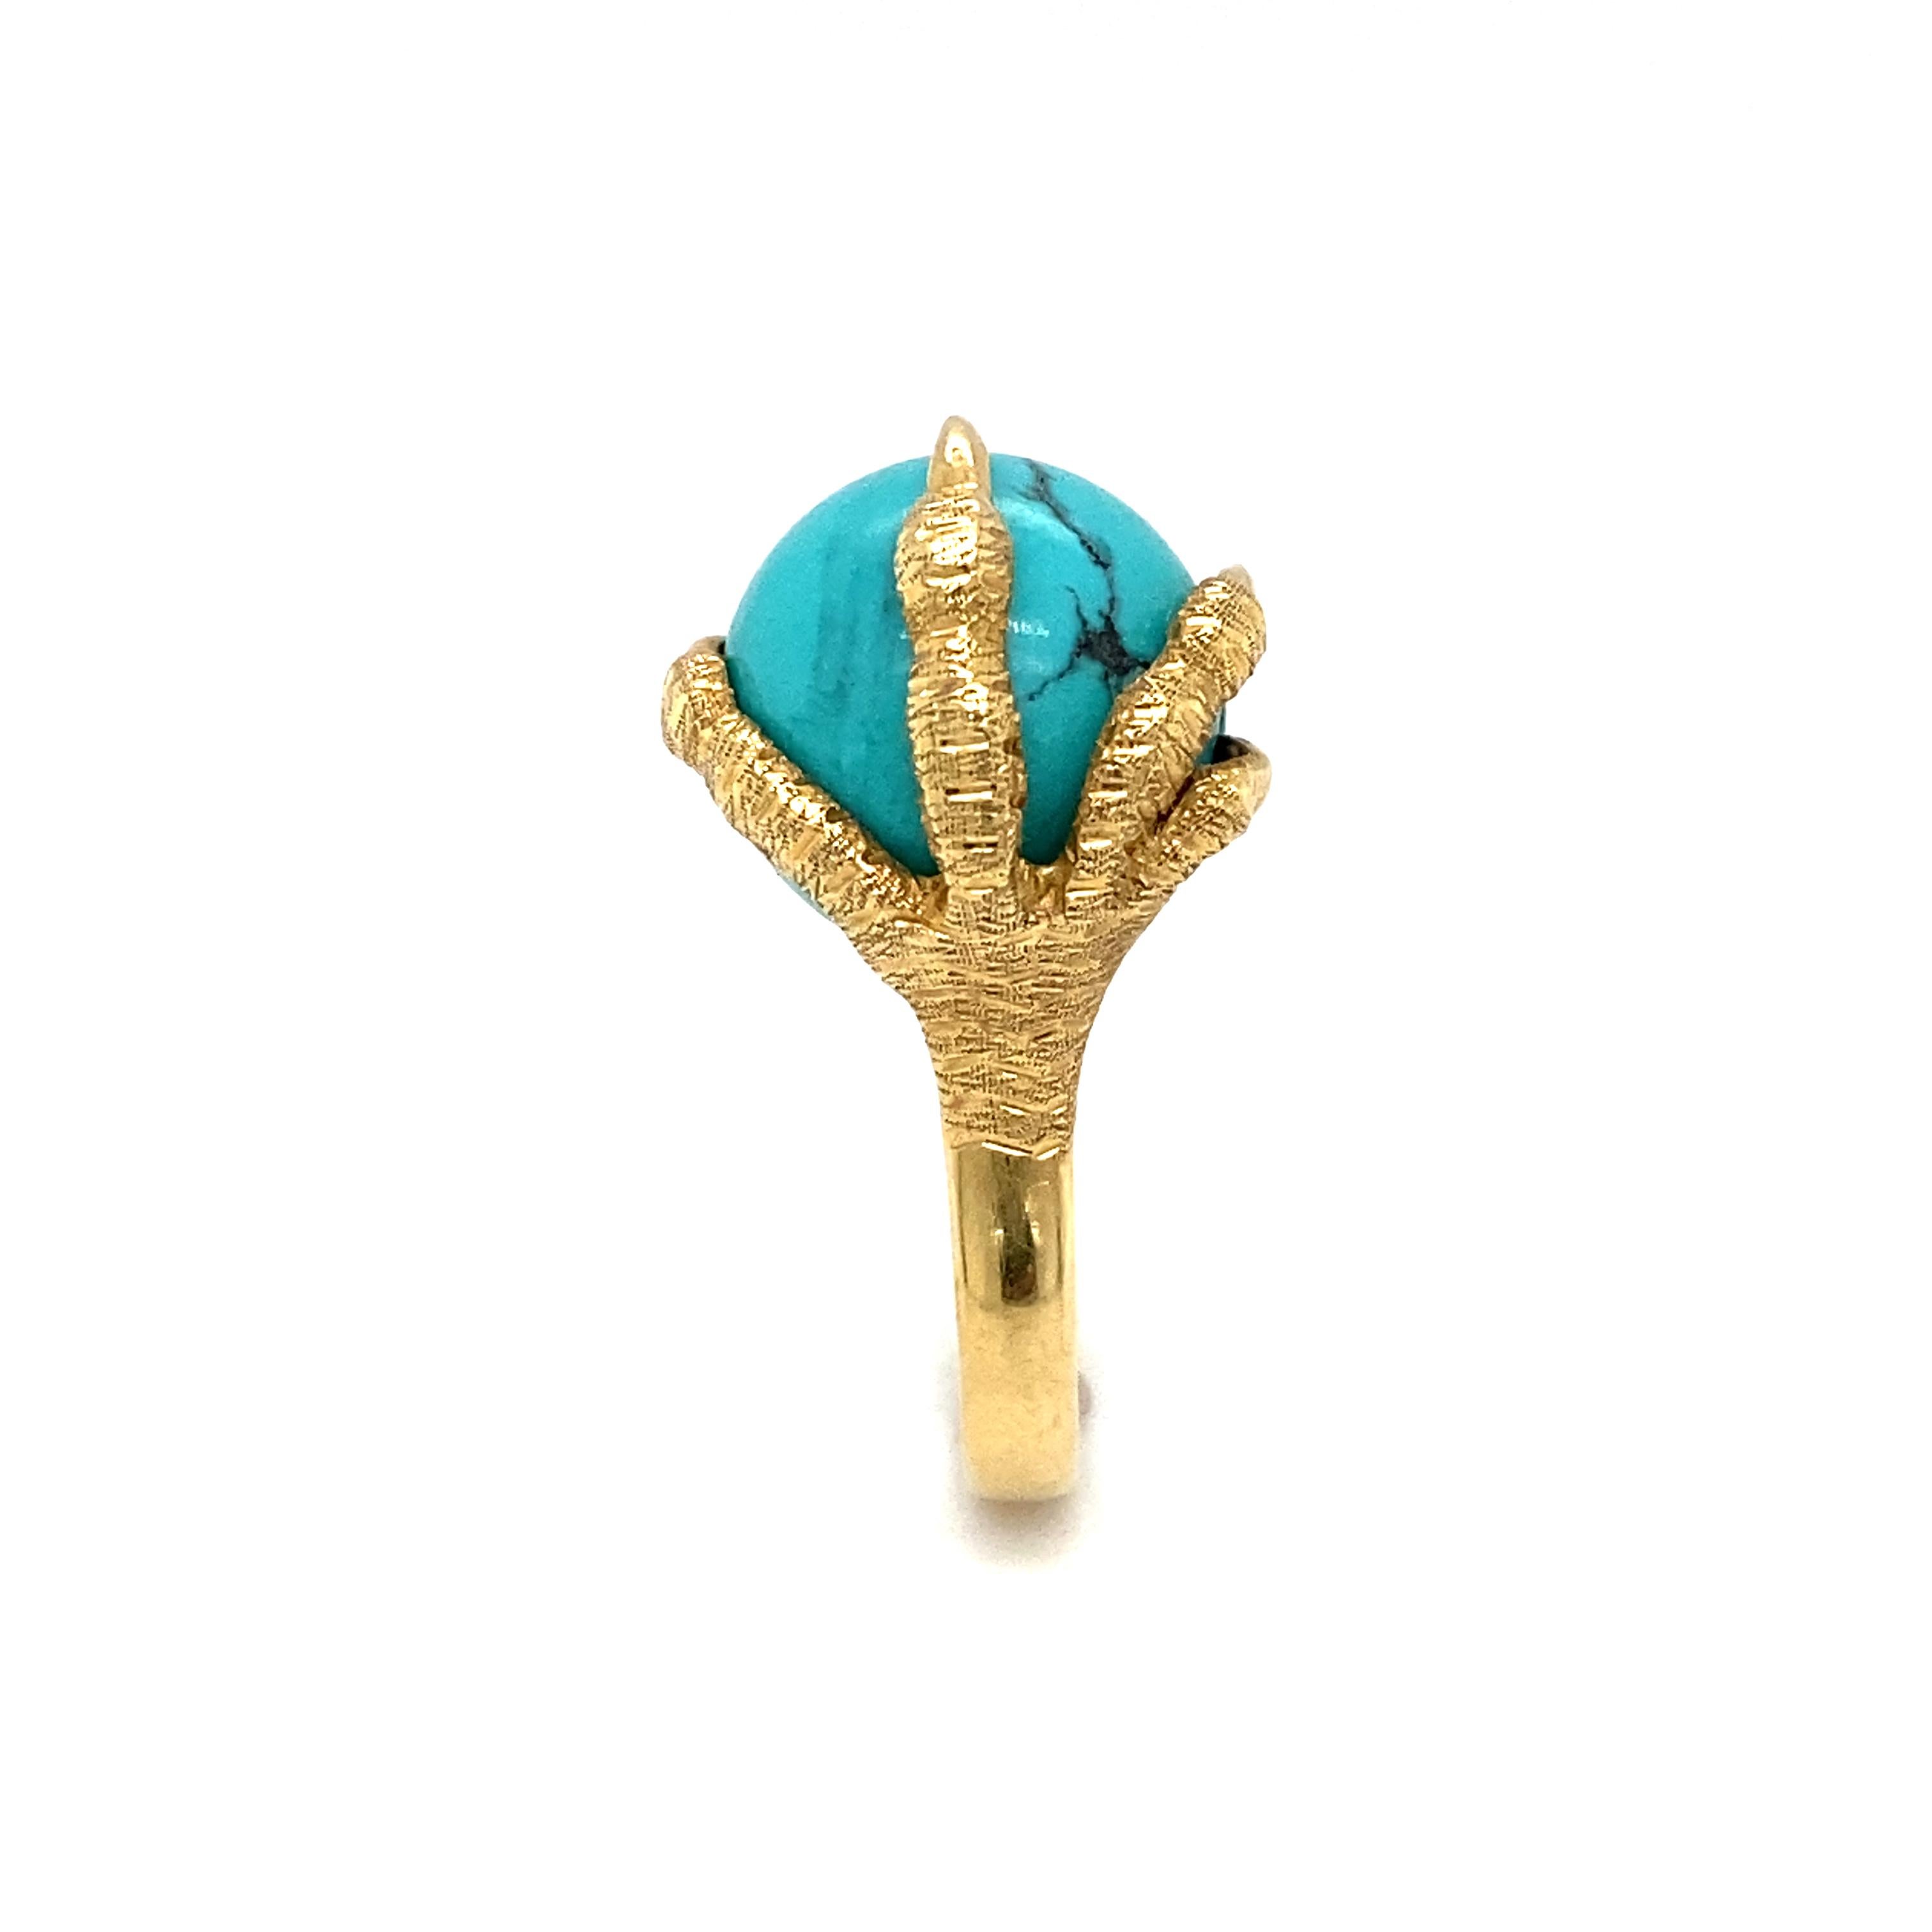 Taille pampille Circa 1970s Turquoise Bead and Claw Ring in 18 Karat Gold (Bague en or 18 carats avec perles et griffes)  en vente